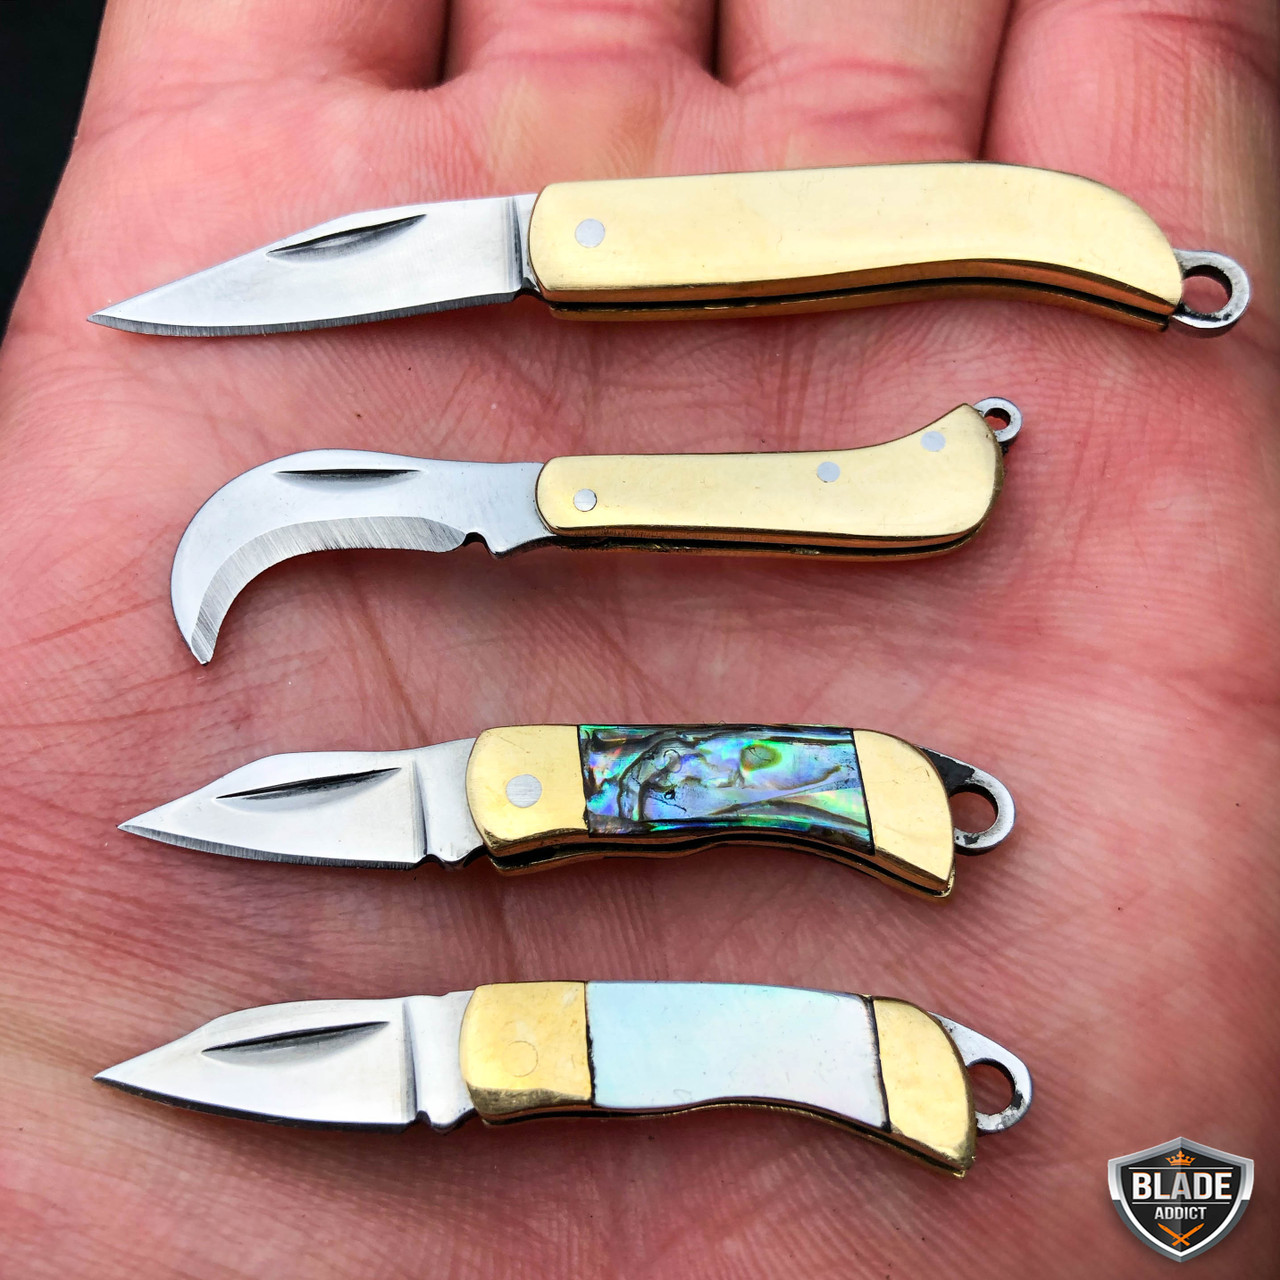 Tiny Pocket Knives Are a Thing, and This New One Is Beautiful